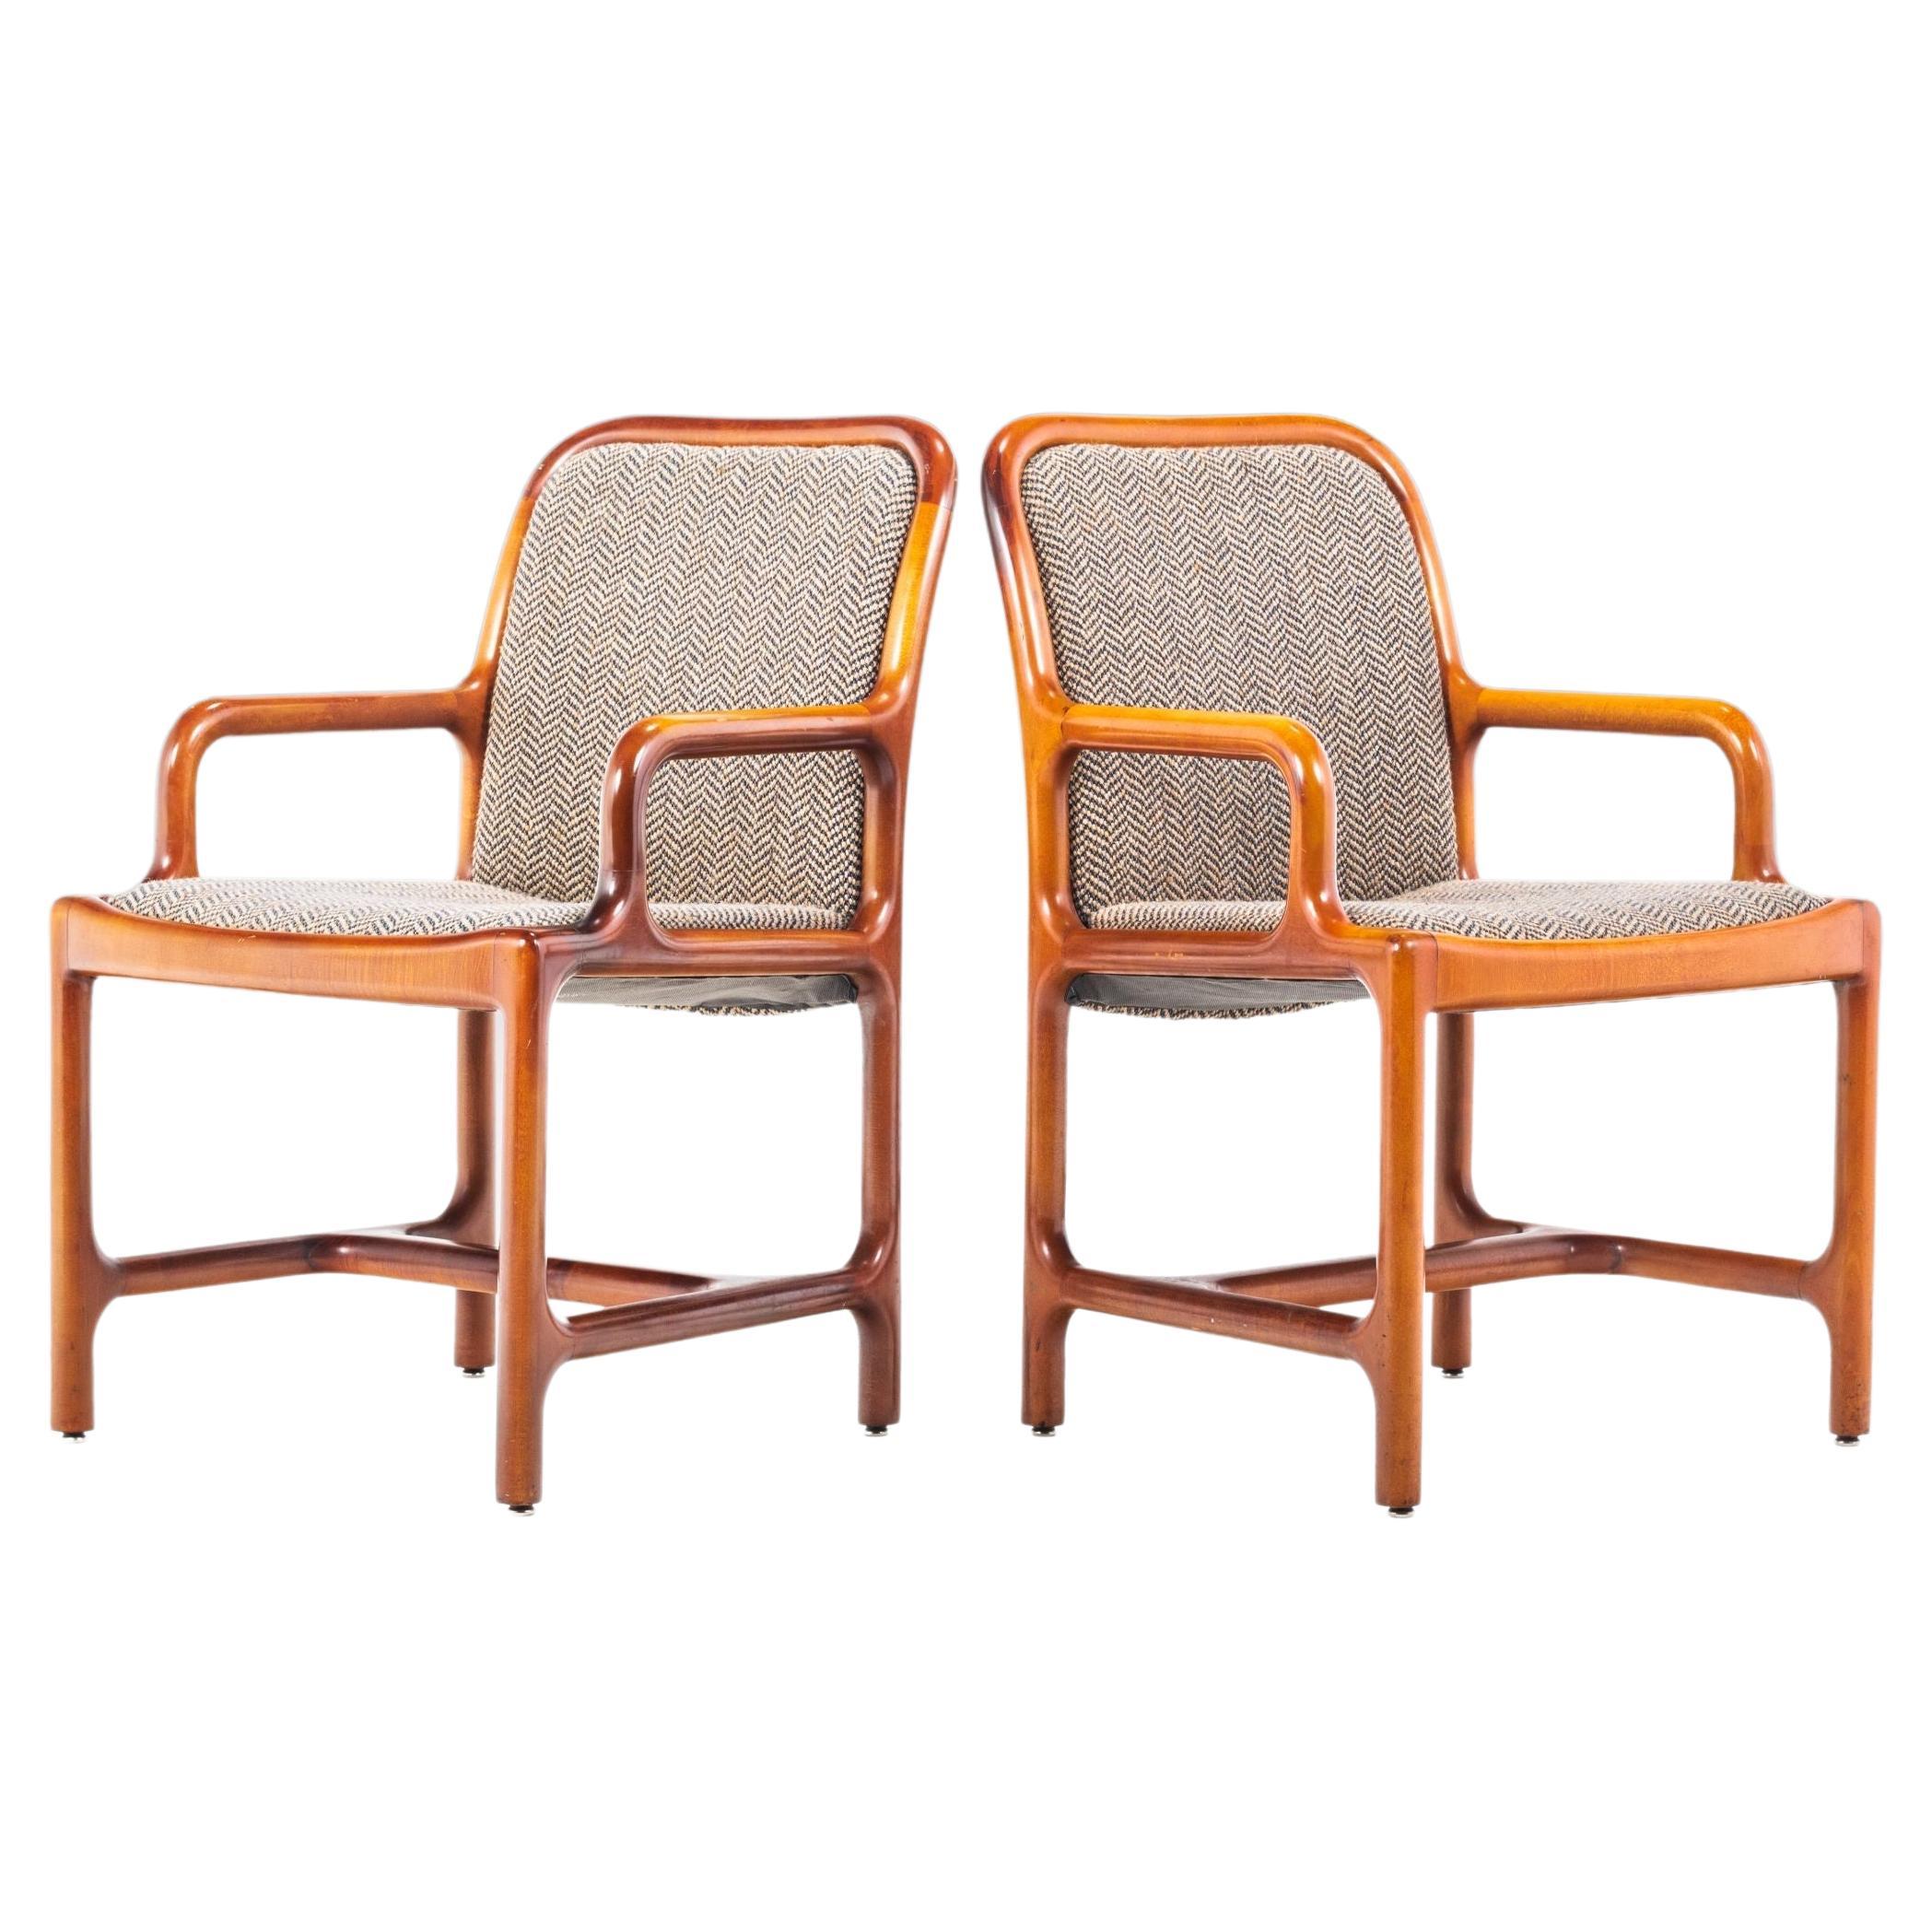 Set of Two '2' Mid-Century Modern Pretzel Chairs in Oak and Original Tweed, USA